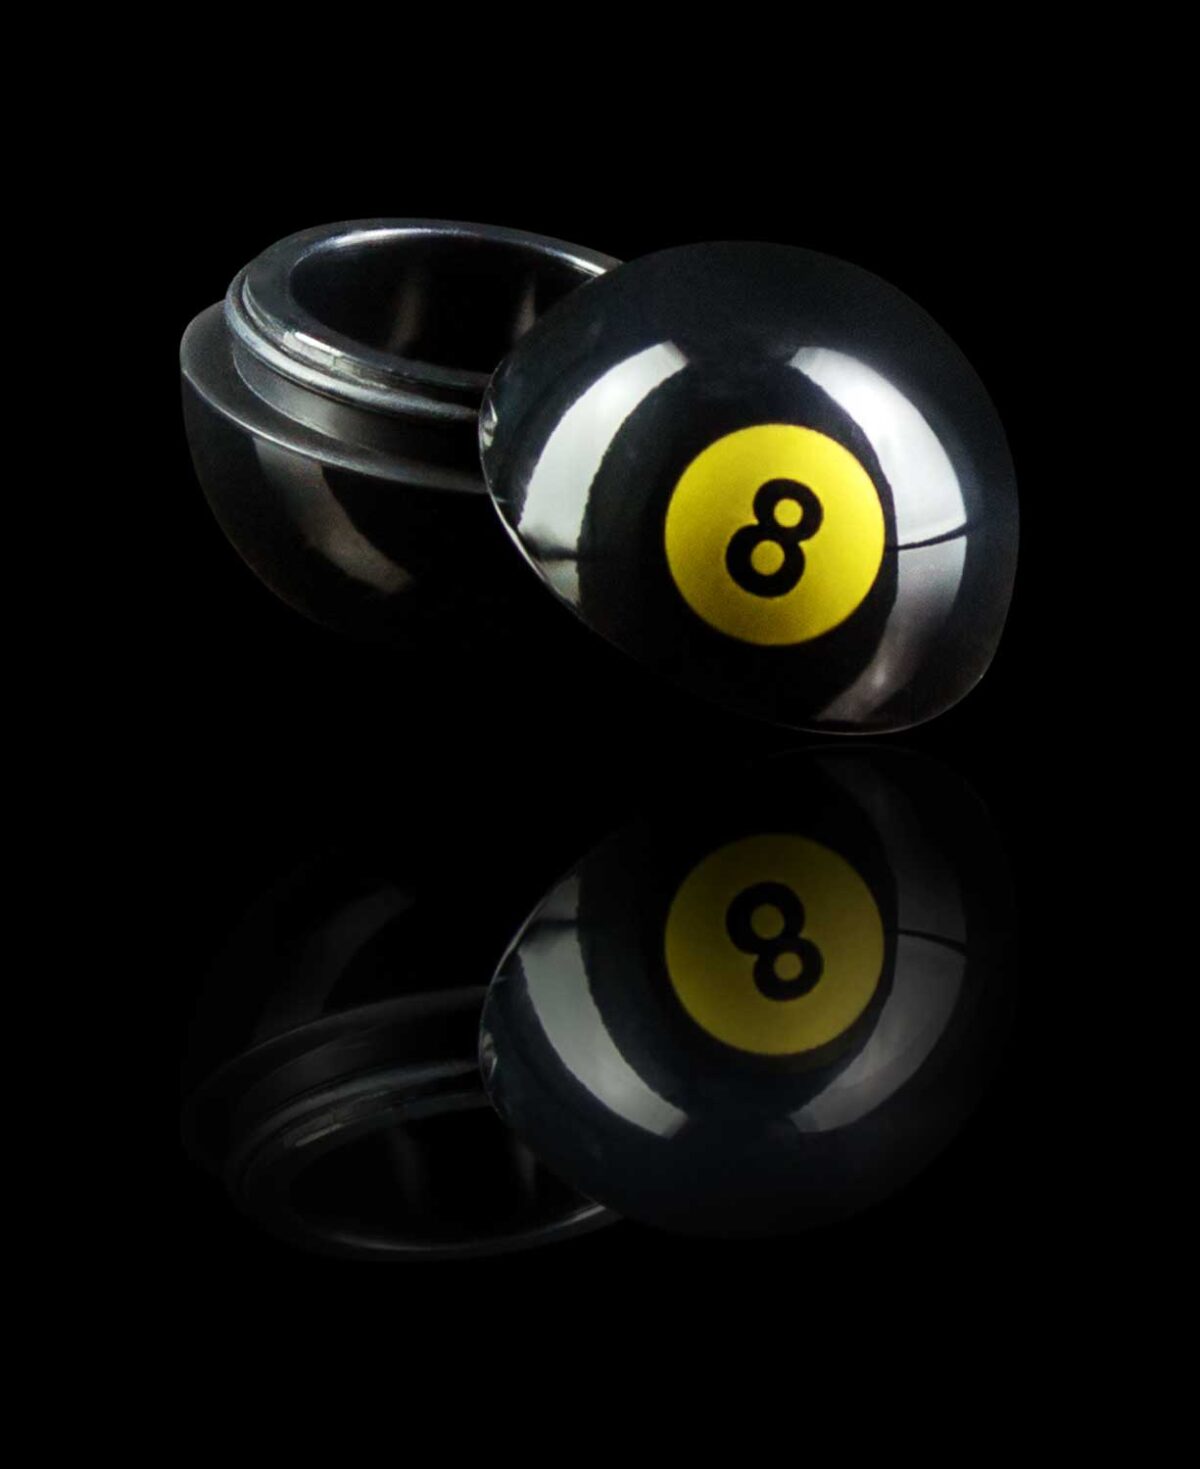 8 ball silicone dab container on black table